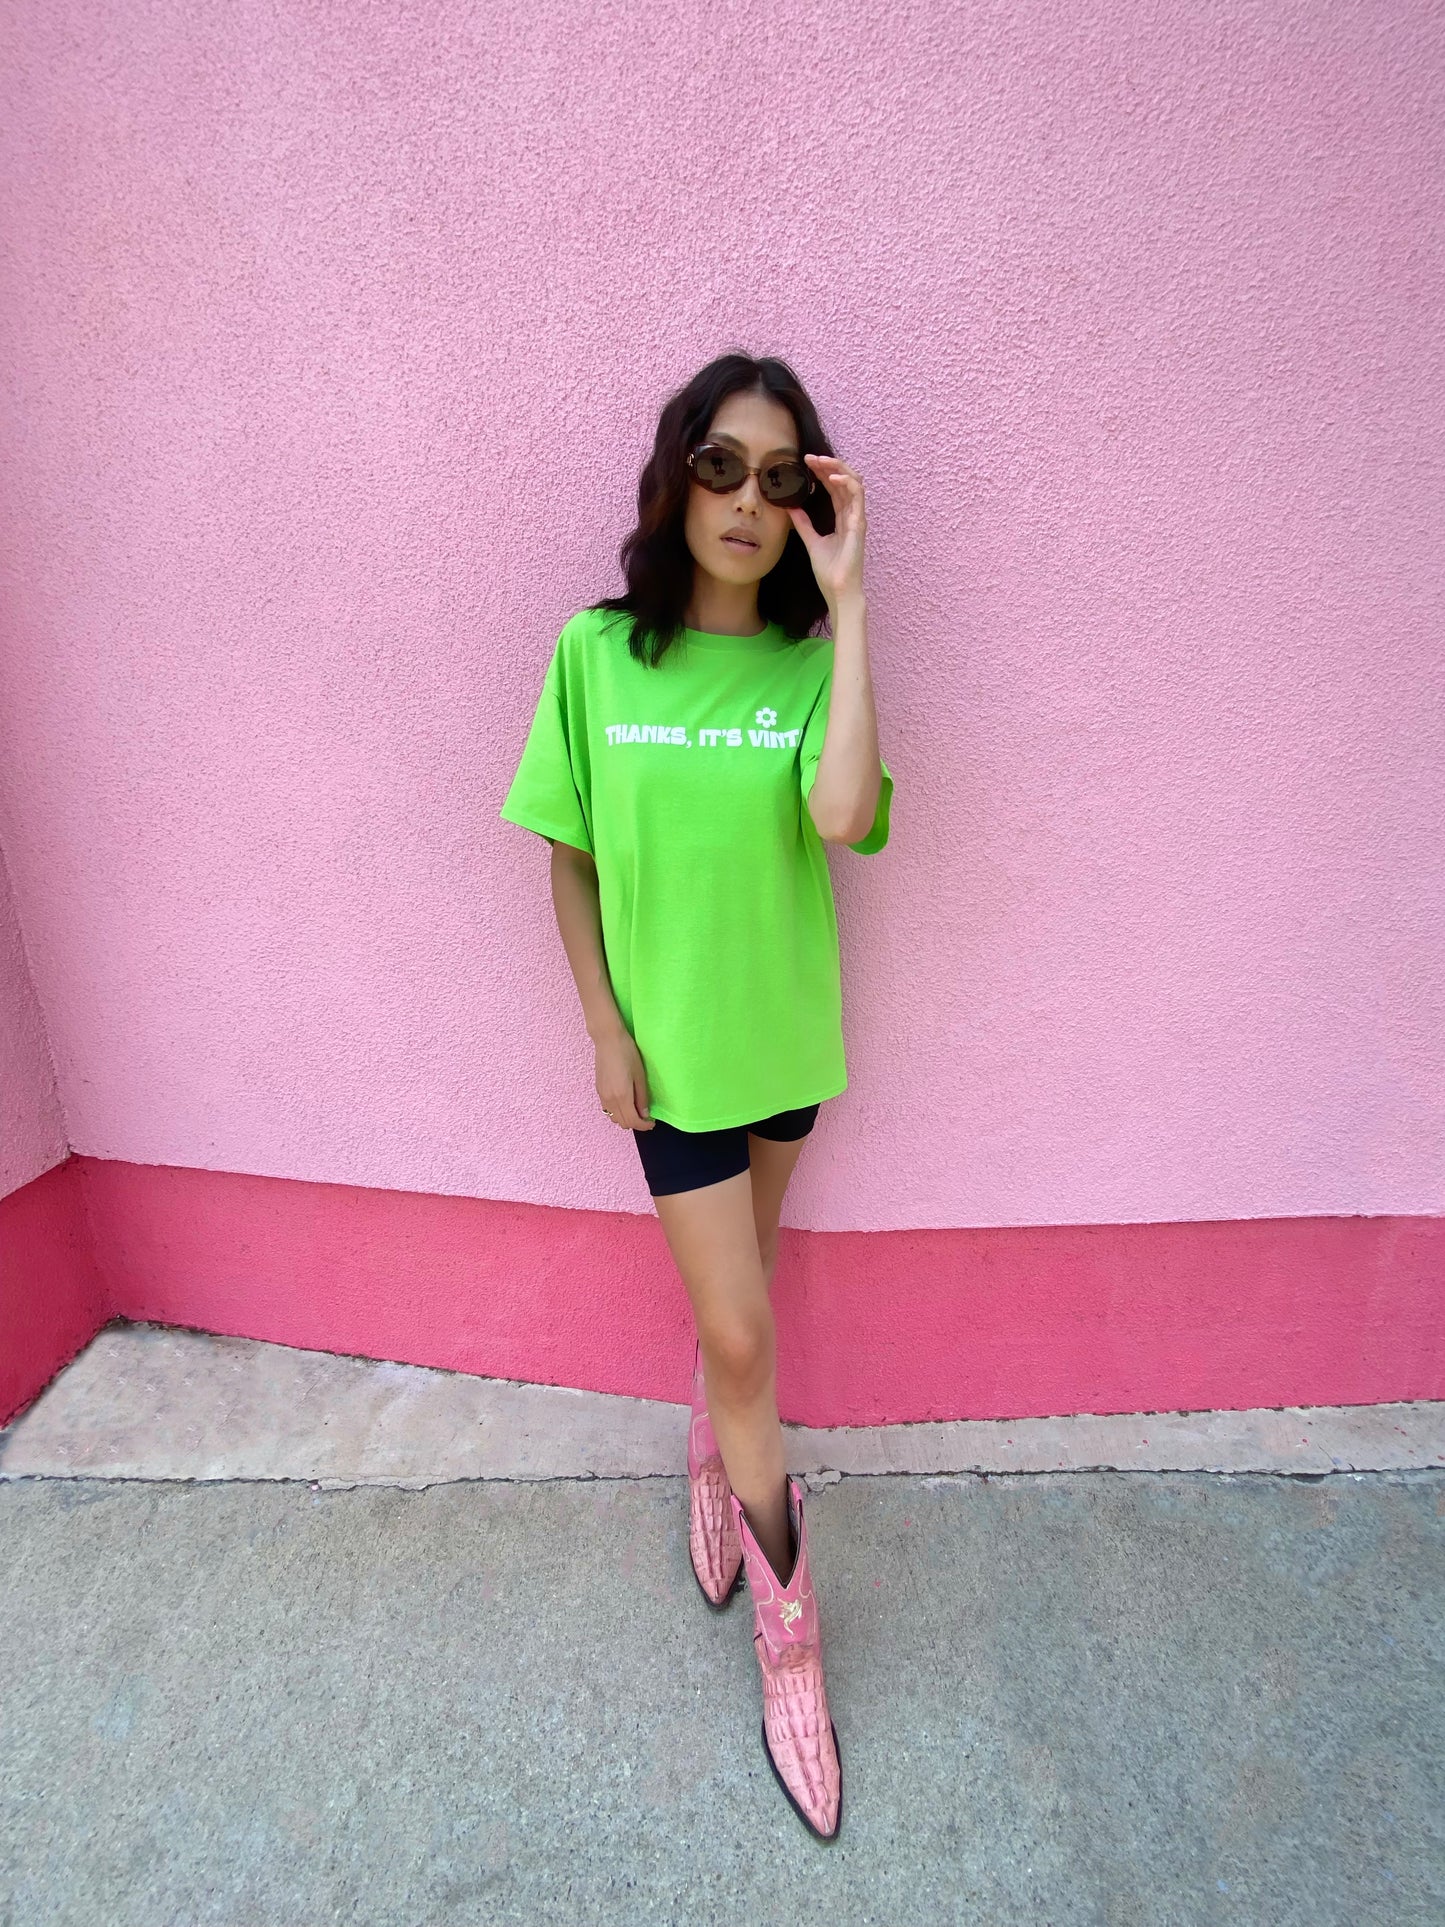 Thanks, It’s Vintage Tee - Lime/ White - Large